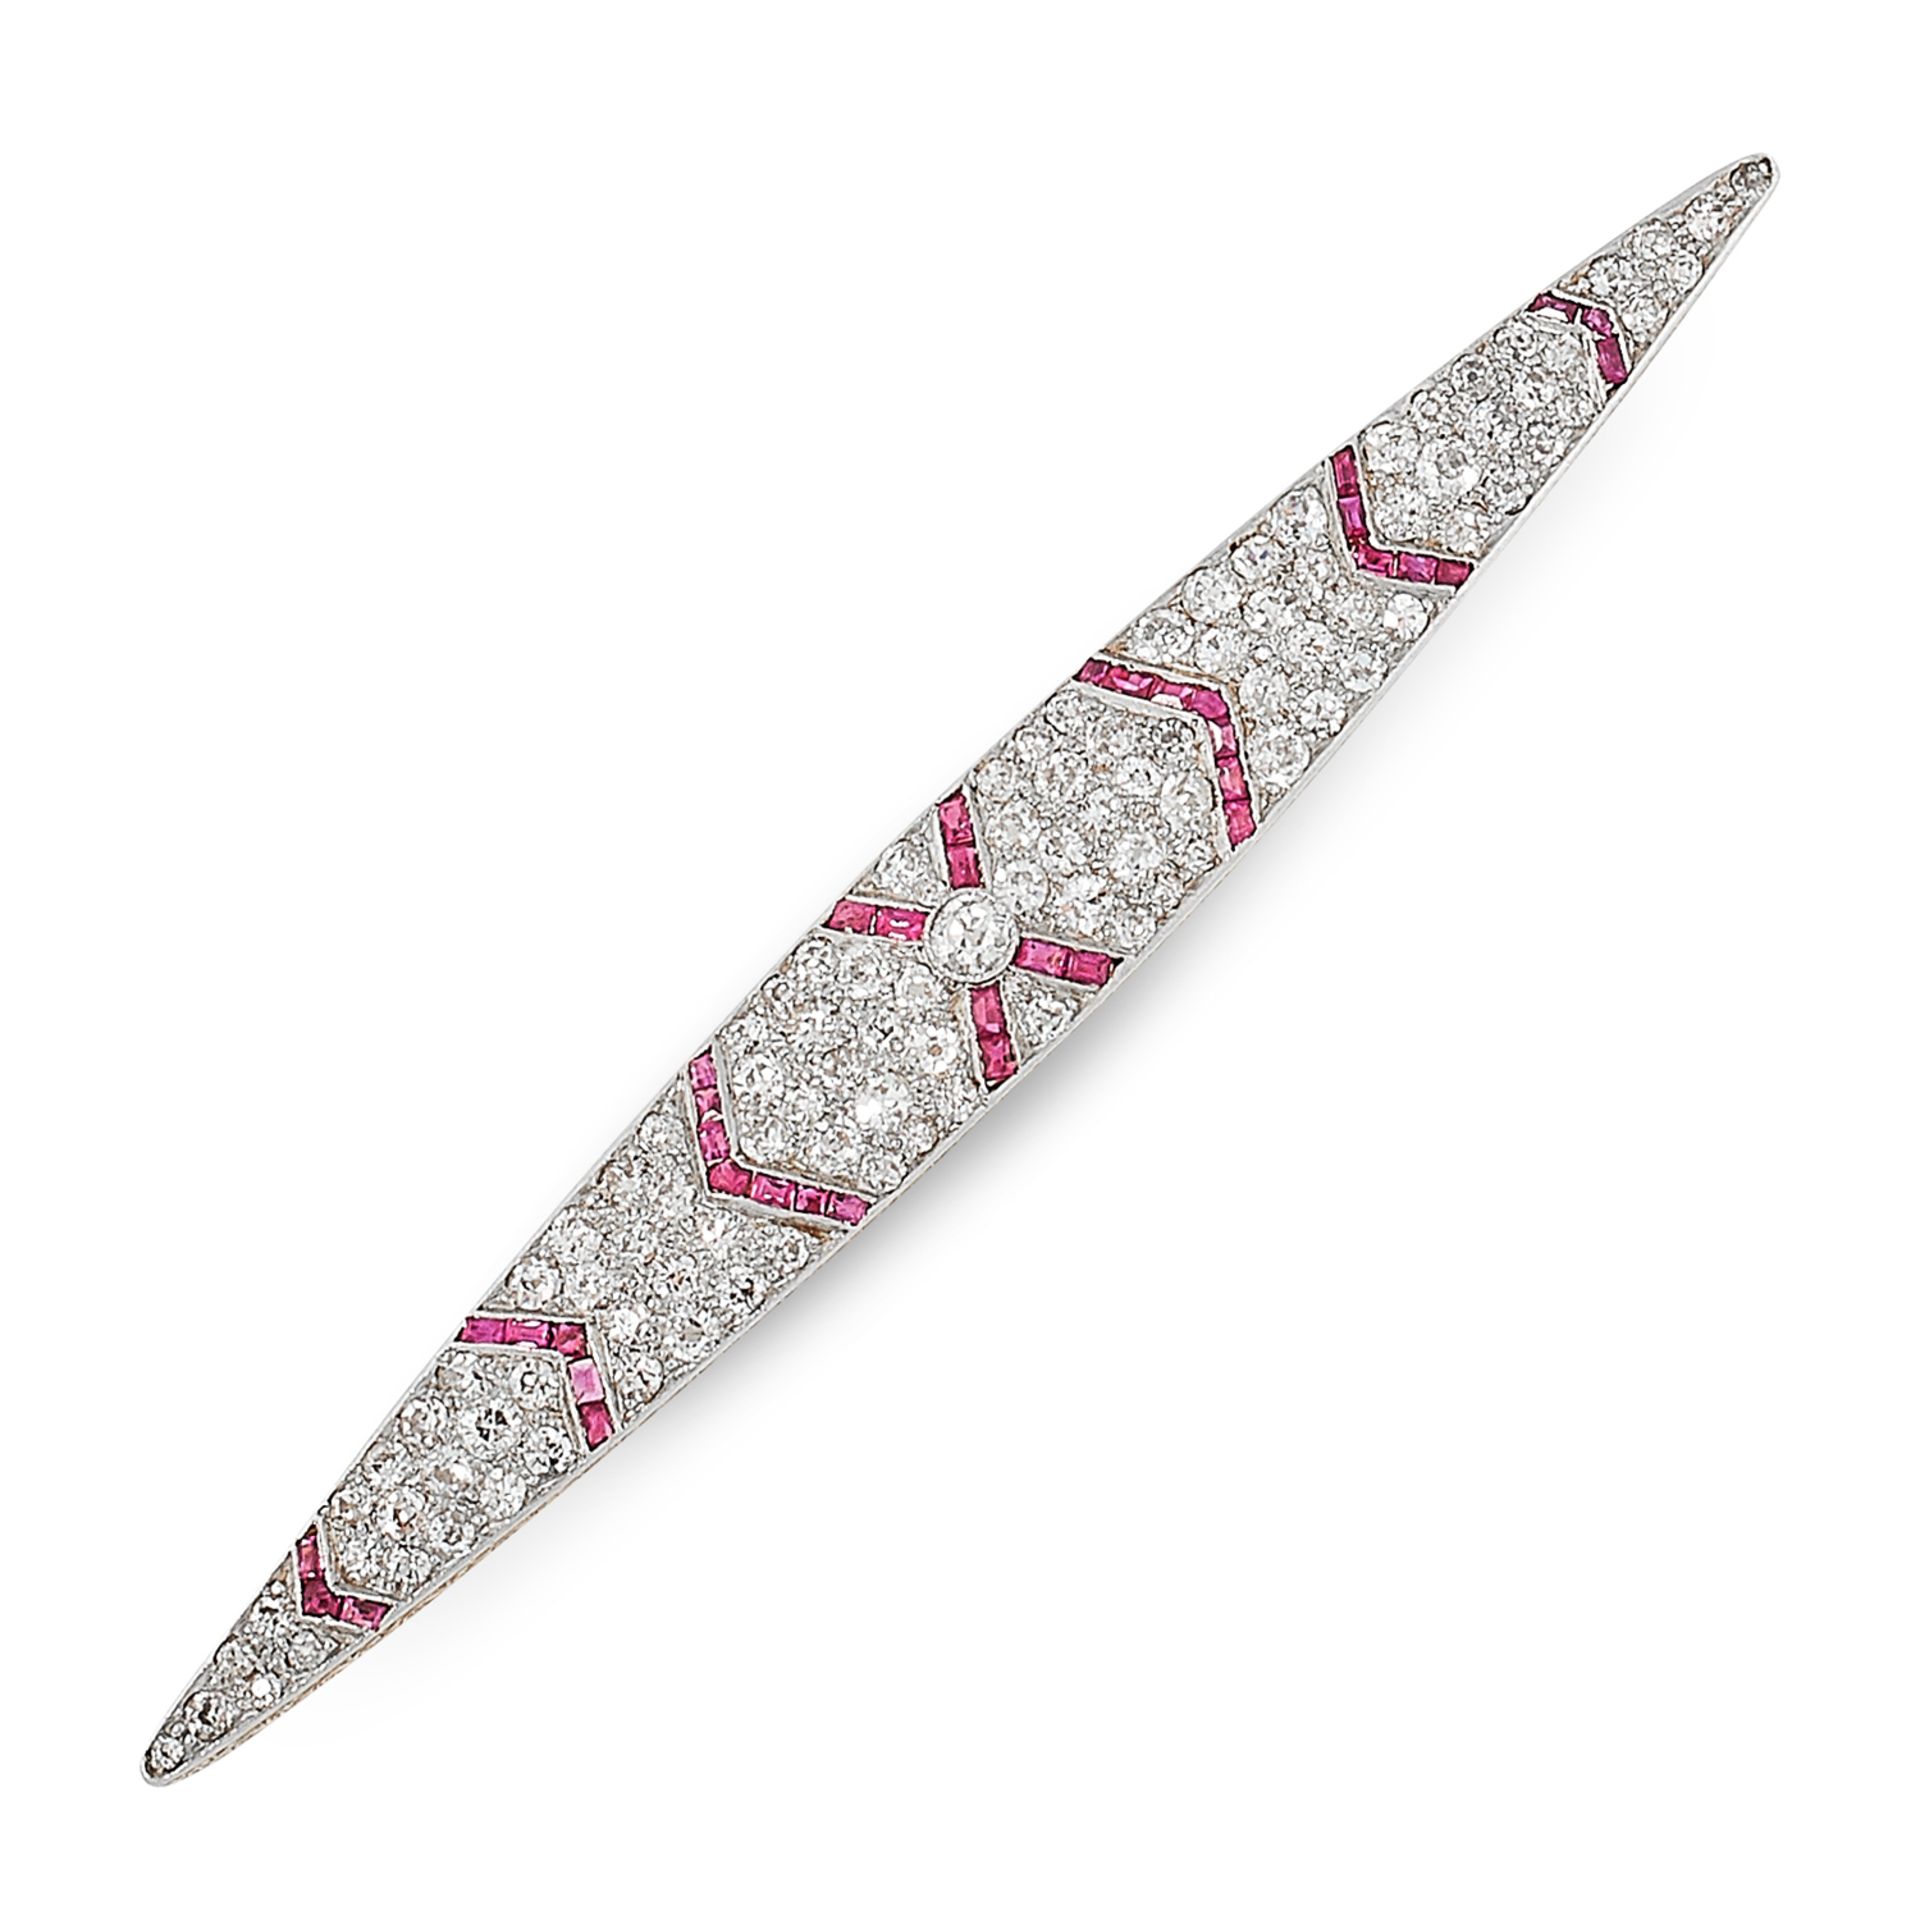 AN ANTIQUE ART DECO DIAMOND AND RUBY BAR BROOCH, EARLY 20TH CENTURY in high carat gold, of elongated